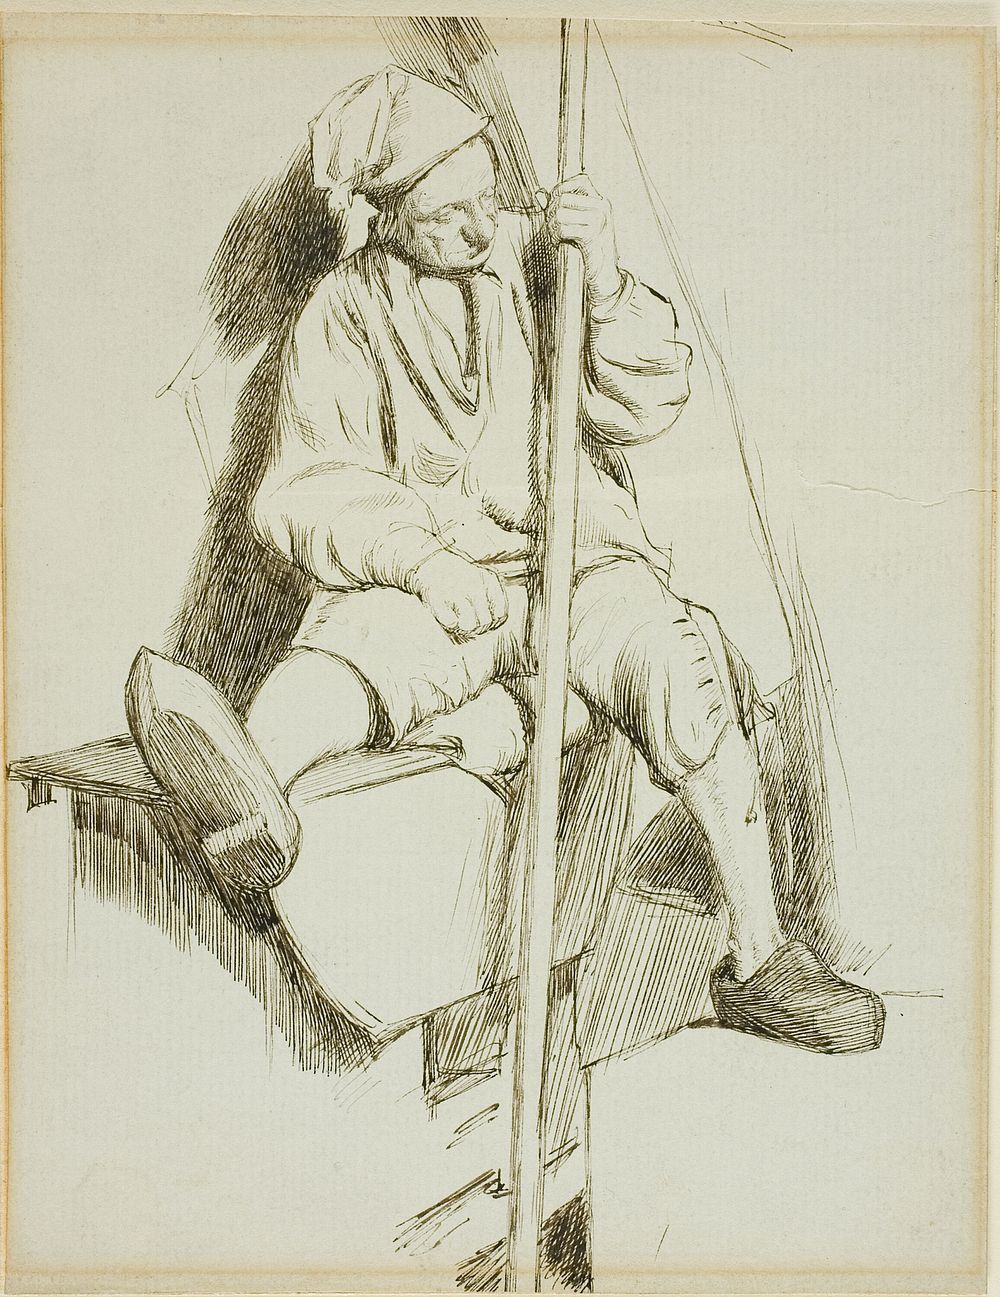 Man Seated, Holding Staff in Left Hand by Charles Samuel Keene